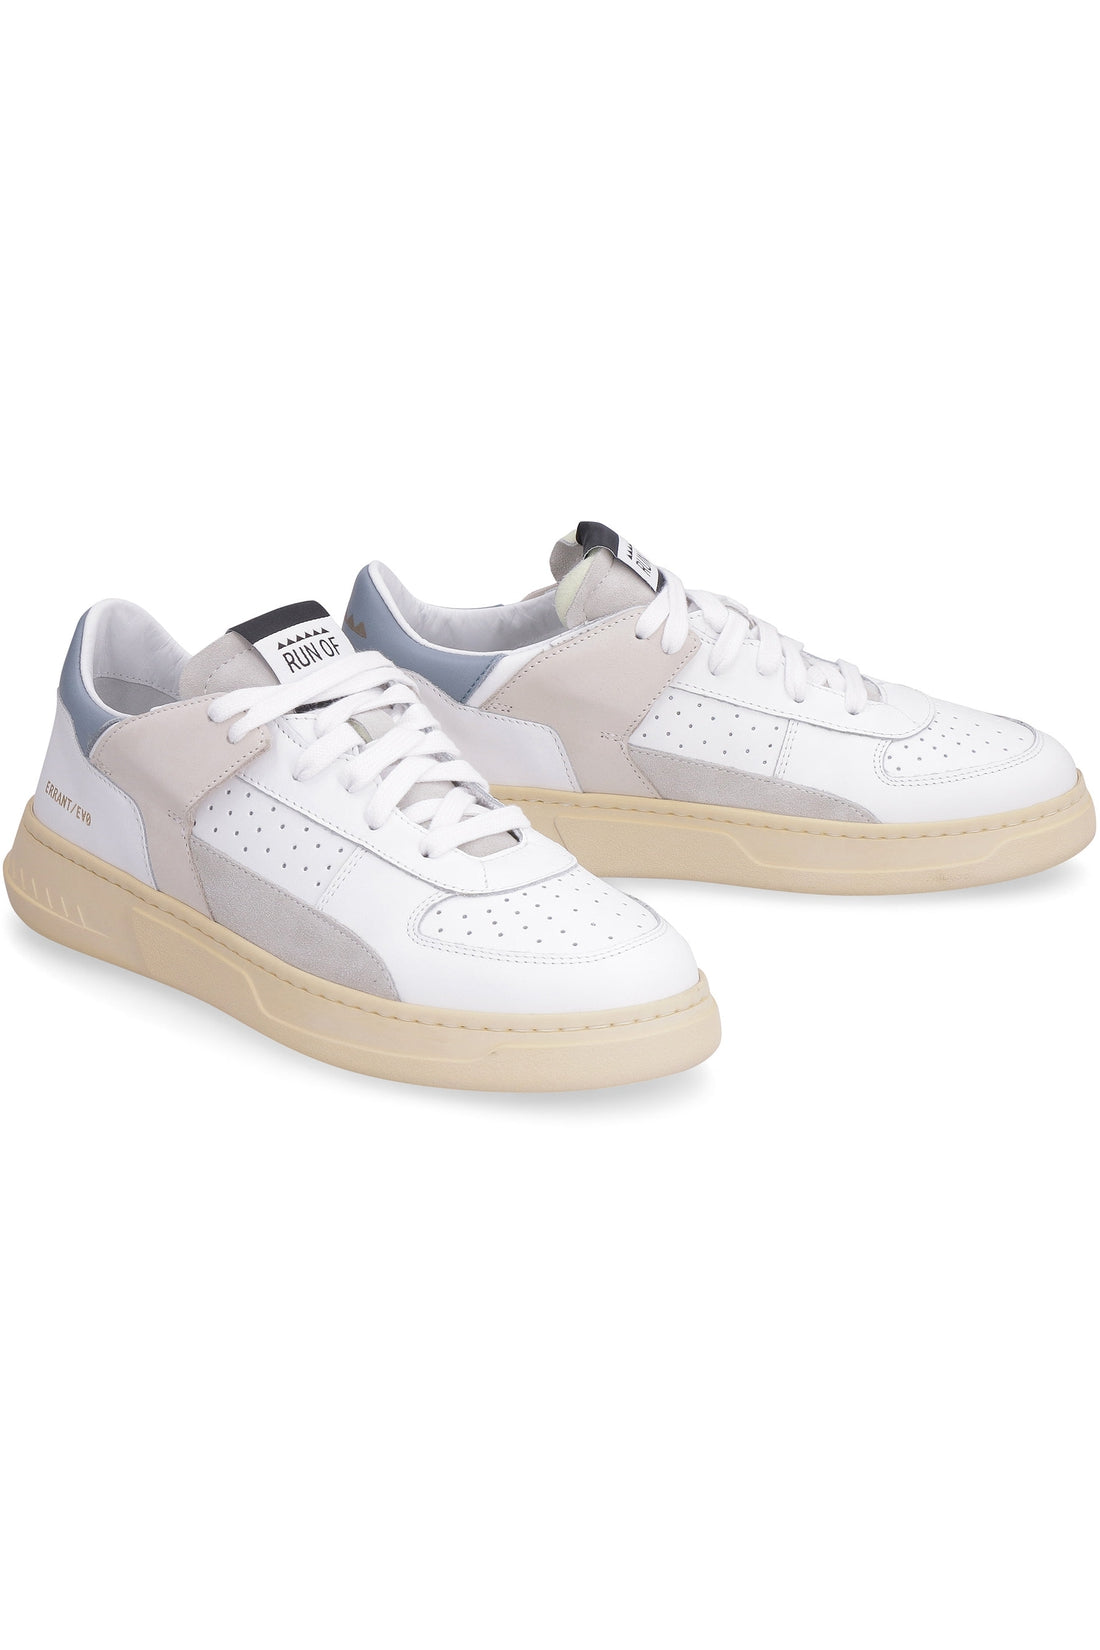 Run Of-OUTLET-SALE-Evo Combi-AQ leather low-top sneakers-ARCHIVIST